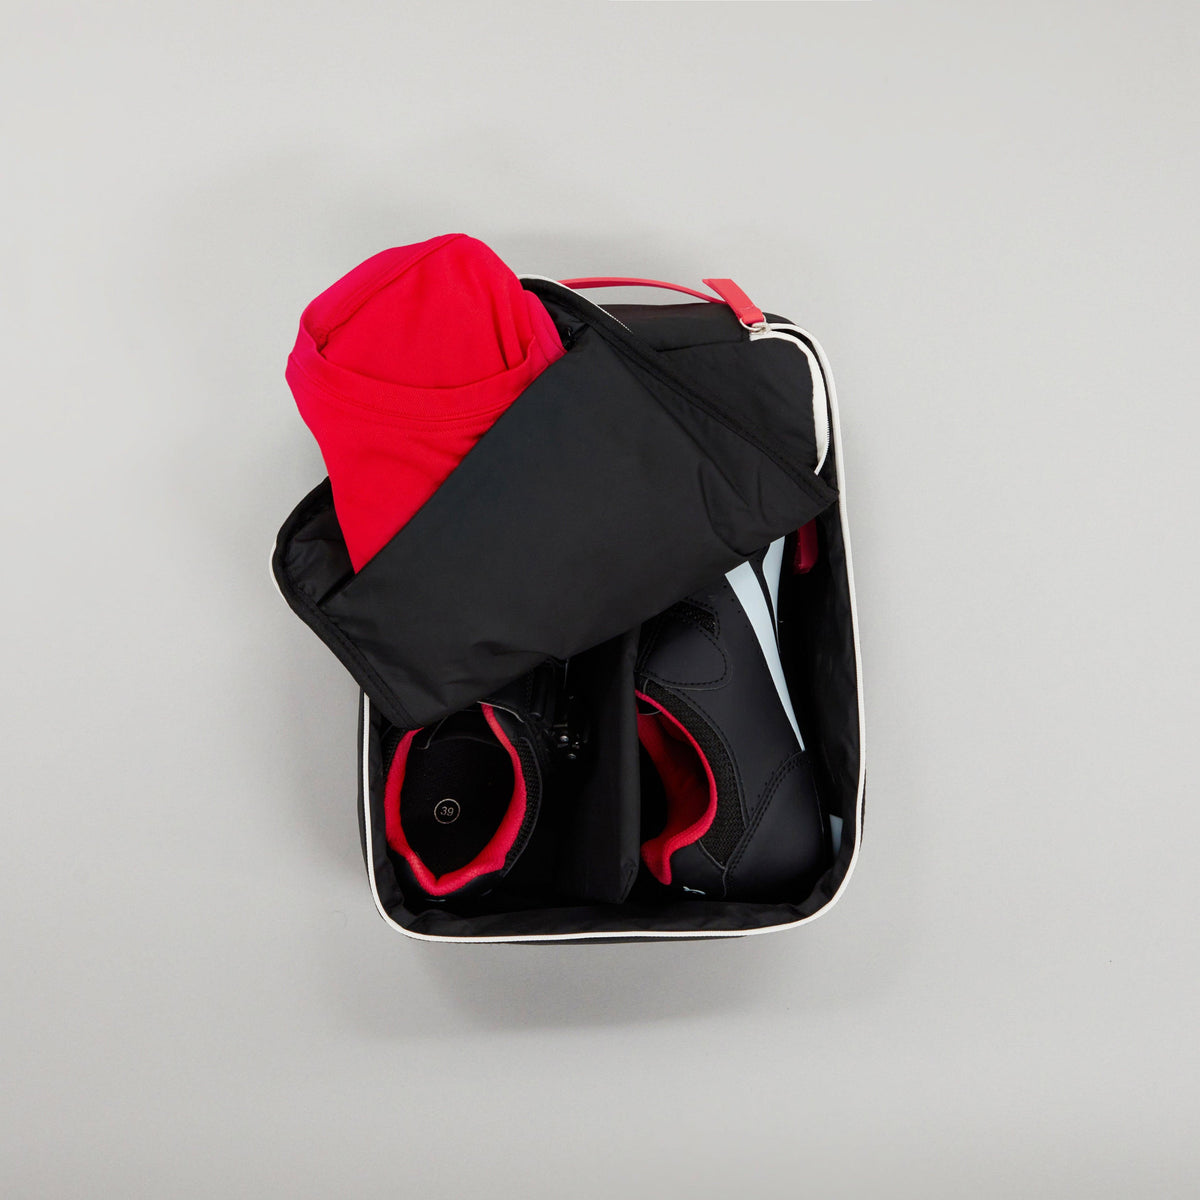 Large Shoe carry in Ink / White / Red colourway unzipped showing shoes inside and socks in the inner pocket 